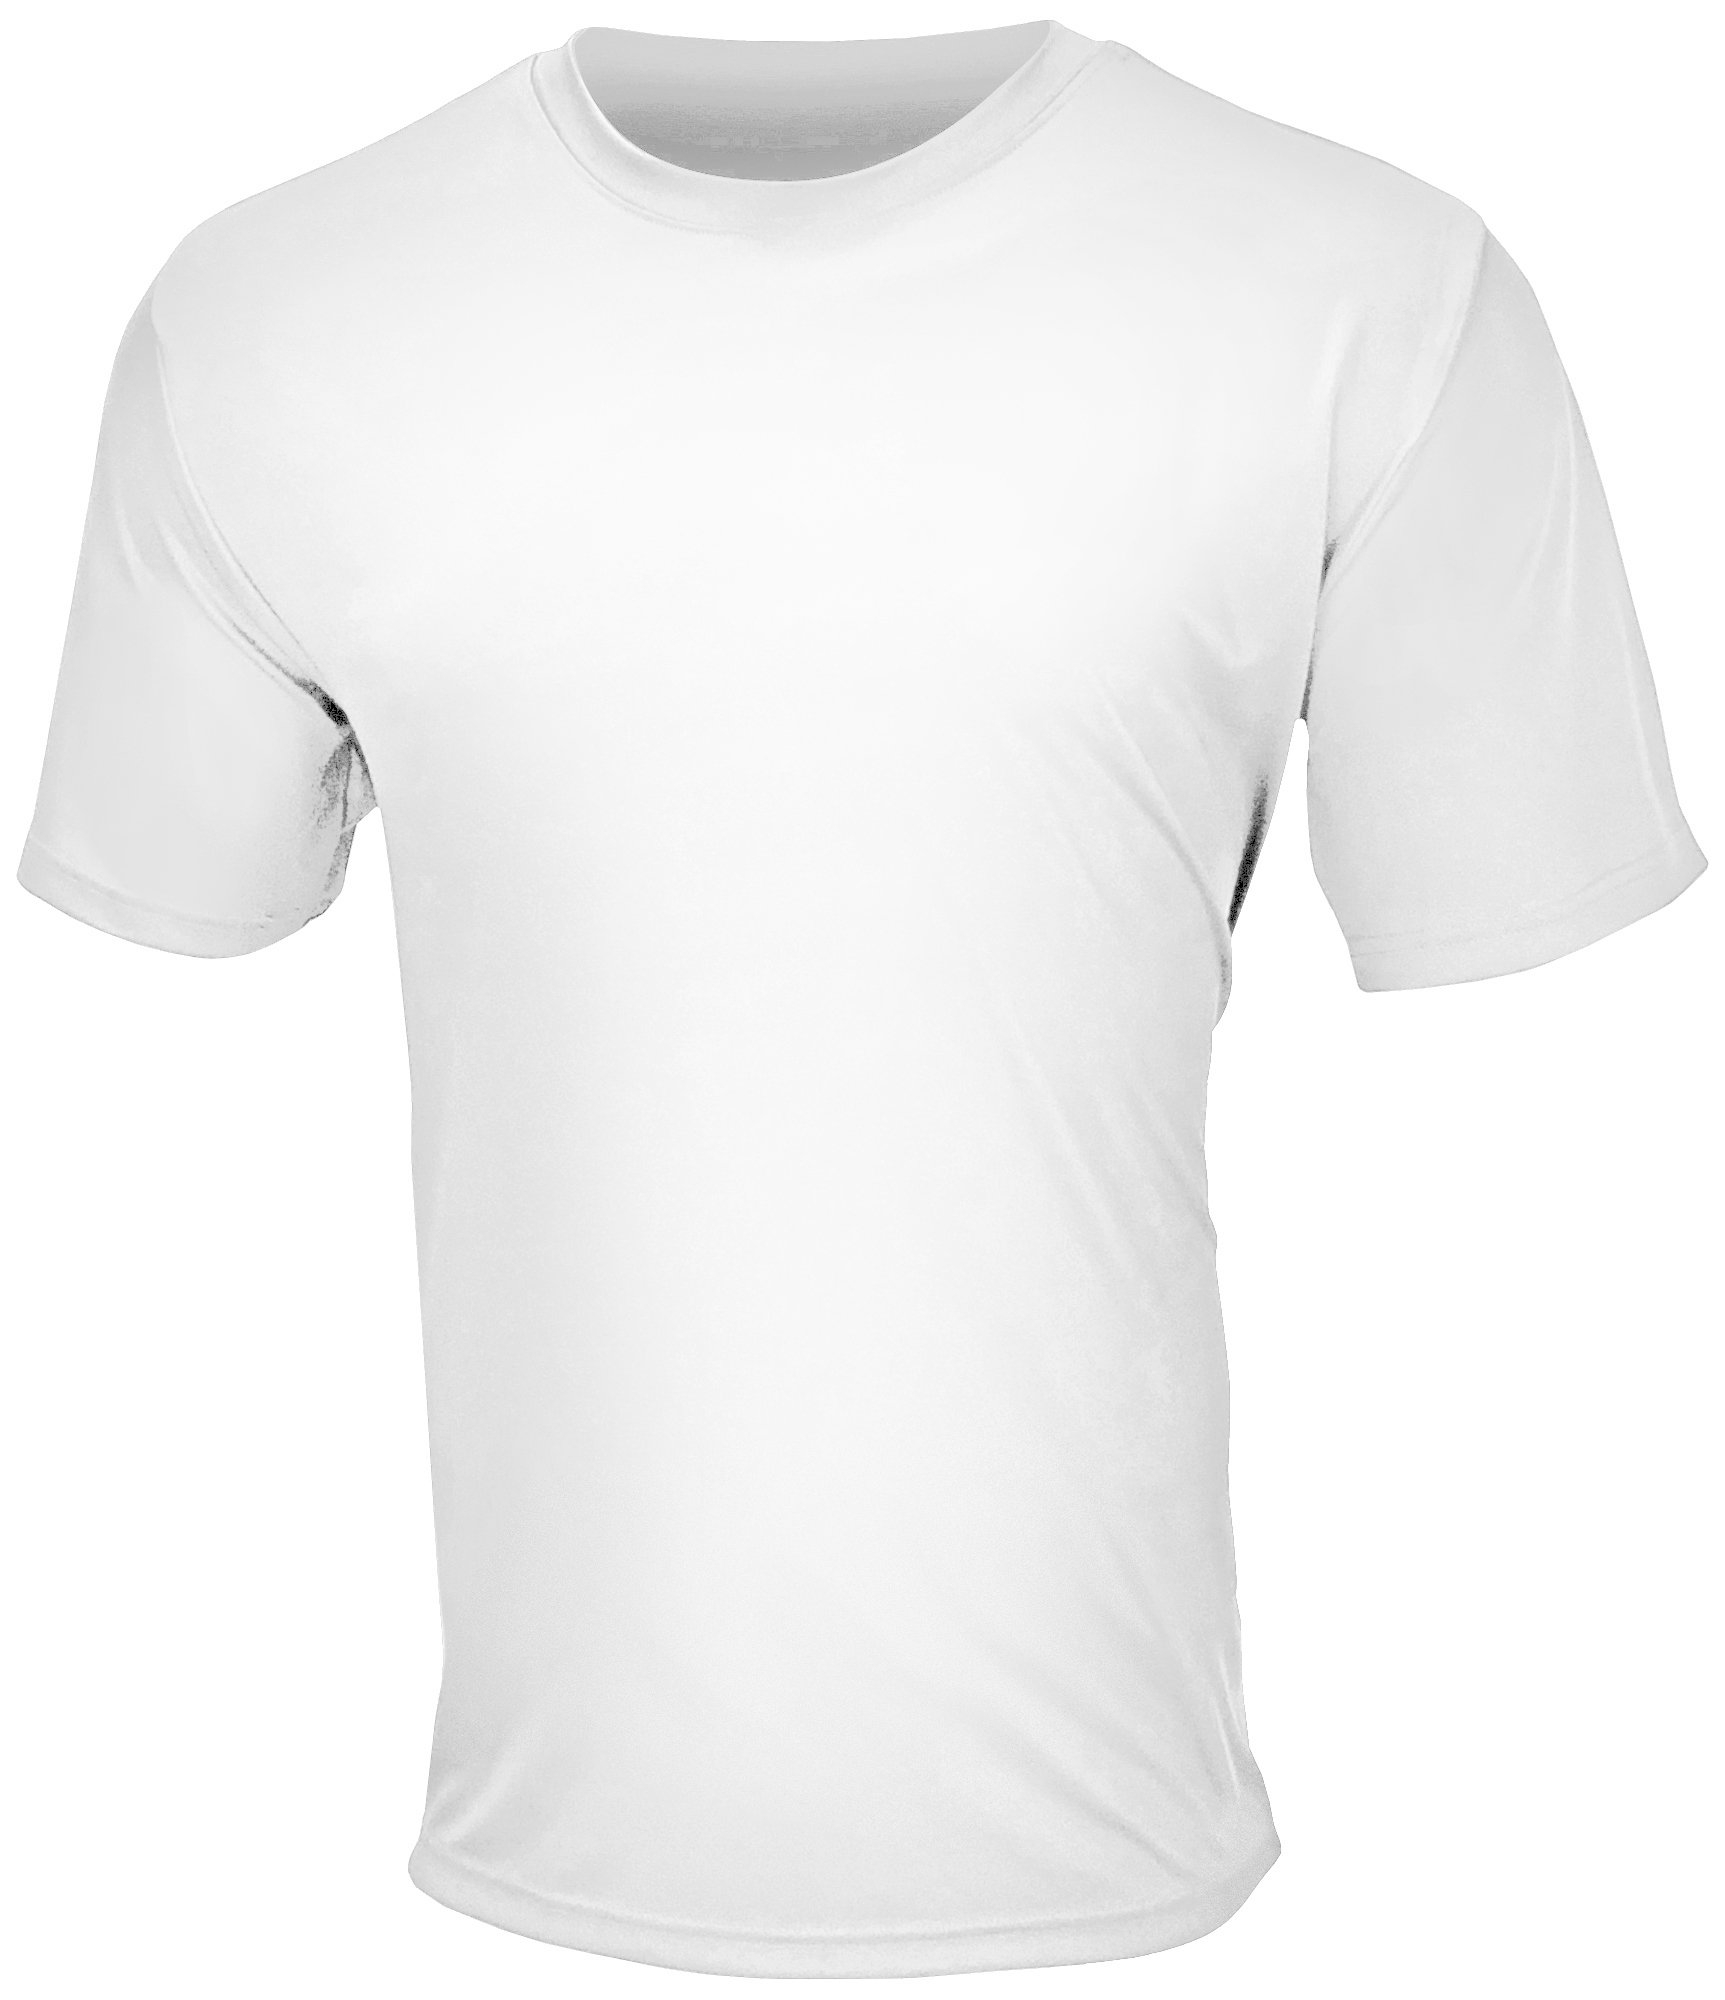 E128541 Epic Cool Performance Dry-Fit Crew T-Shirts